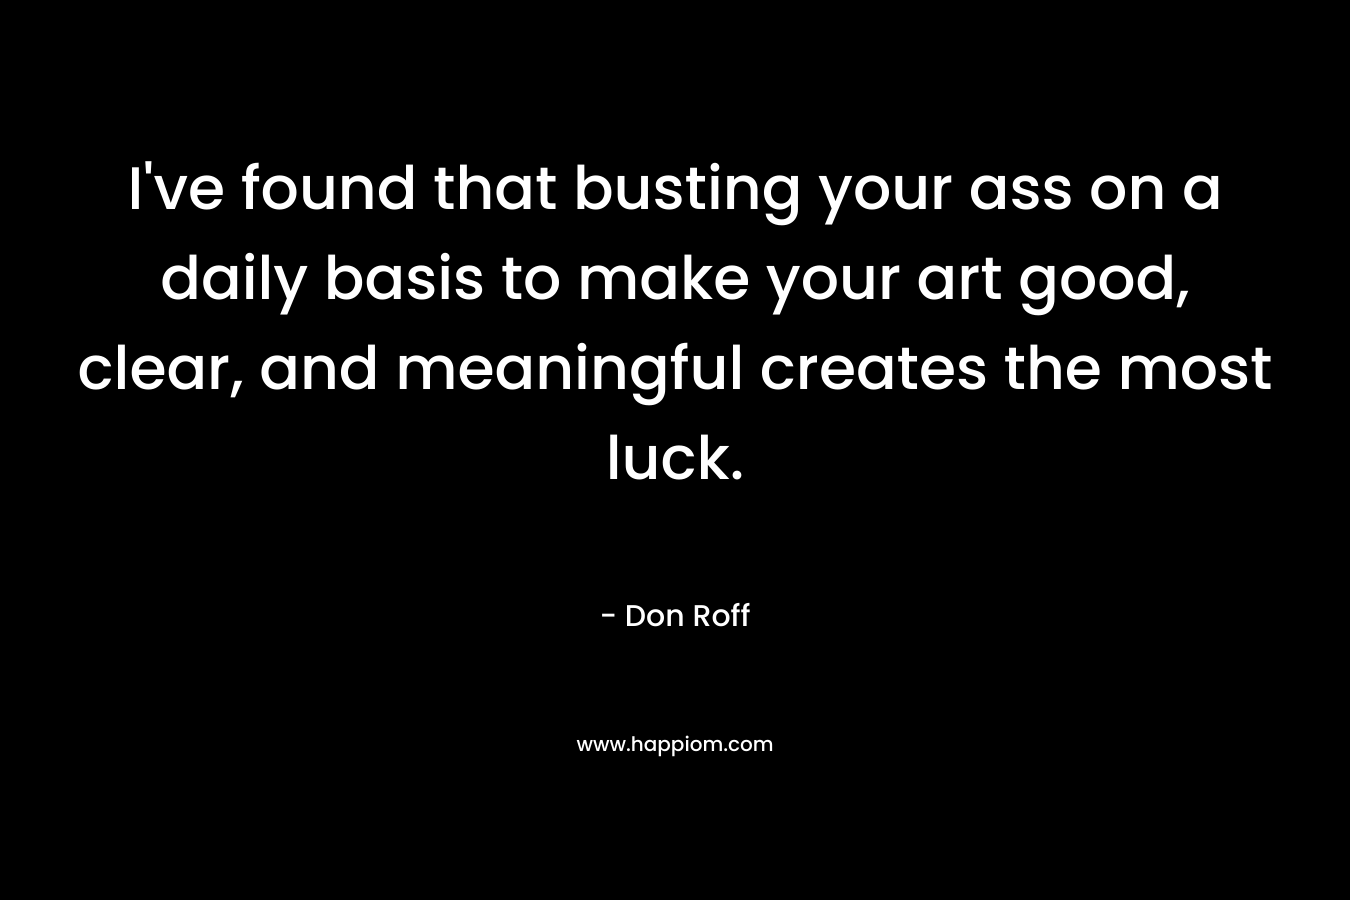 I've found that busting your ass on a daily basis to make your art good, clear, and meaningful creates the most luck.